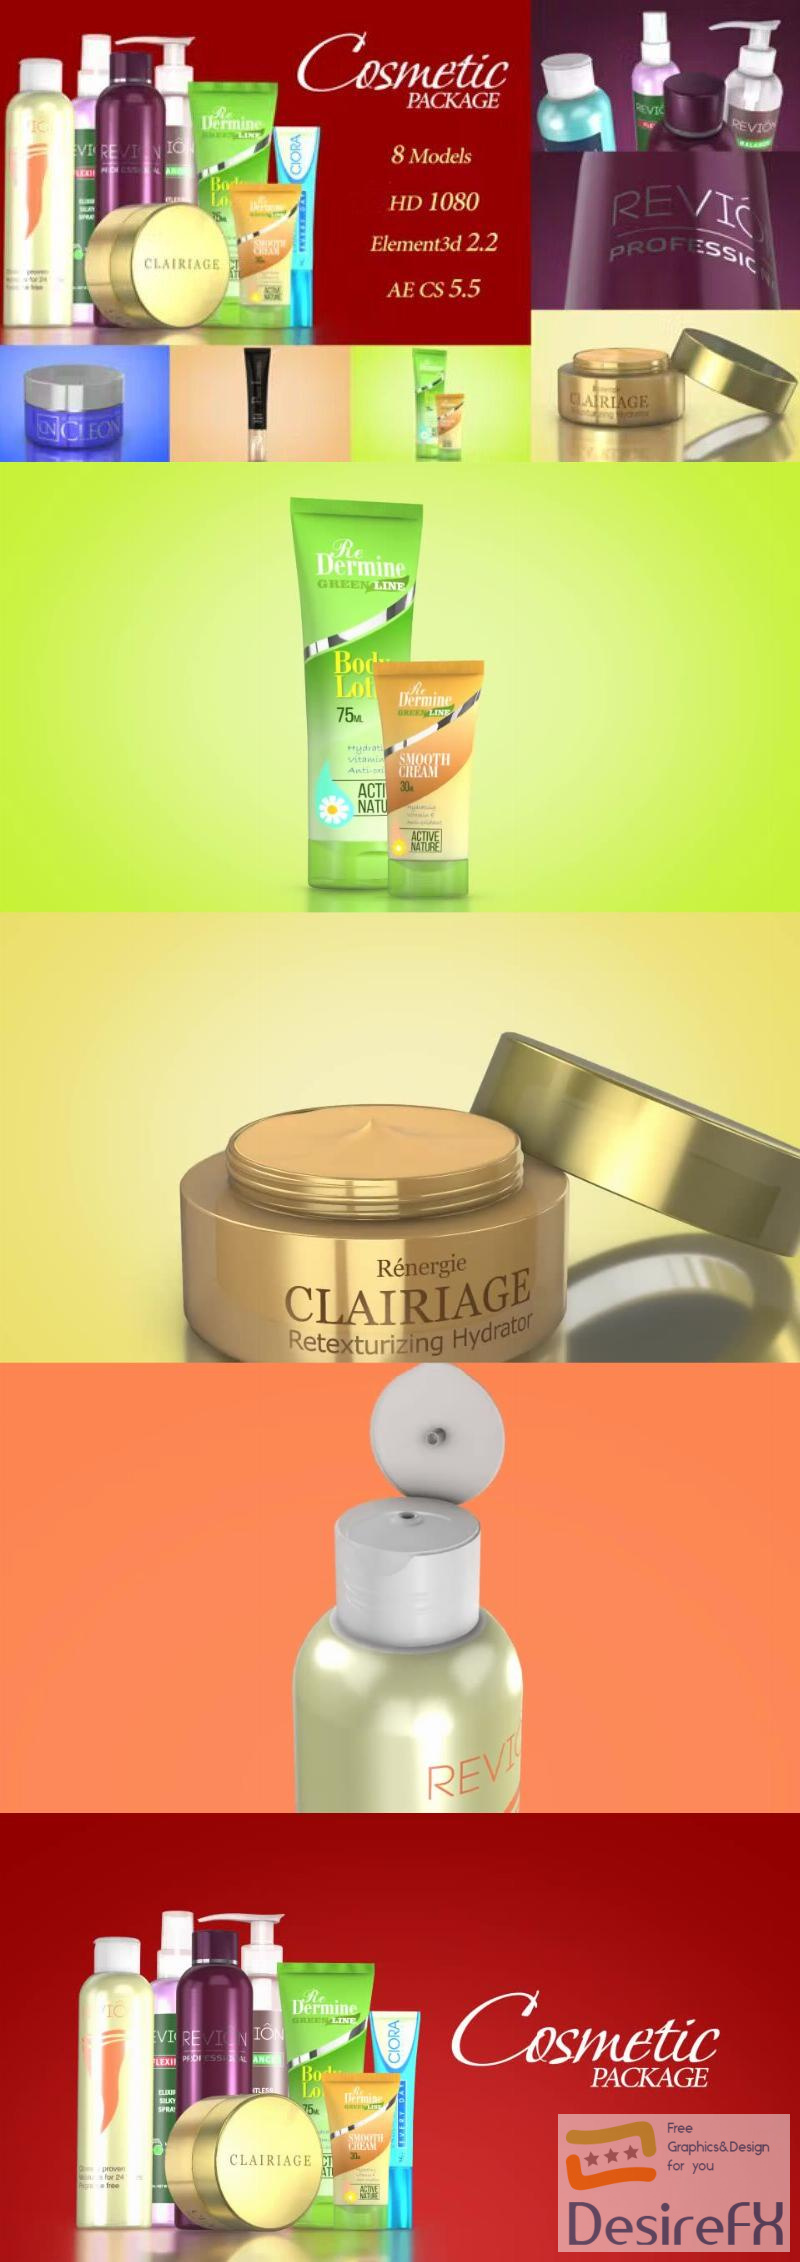 Videohive Cosmetic Package Template 19190180